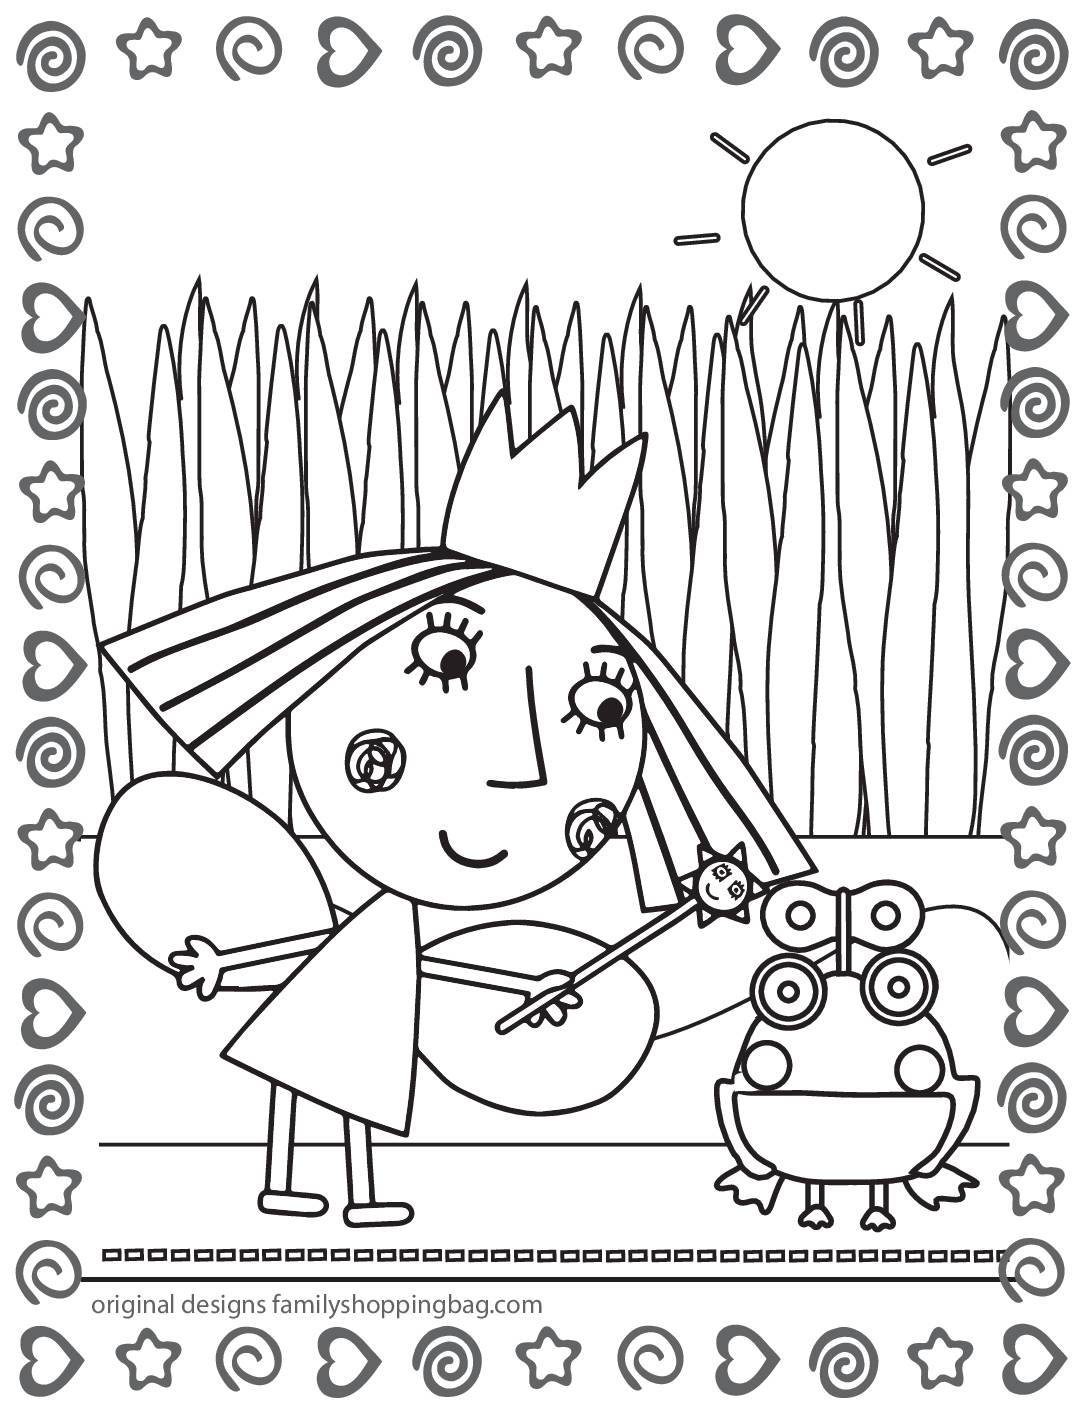 Coloring Page 4 Ben & Holly